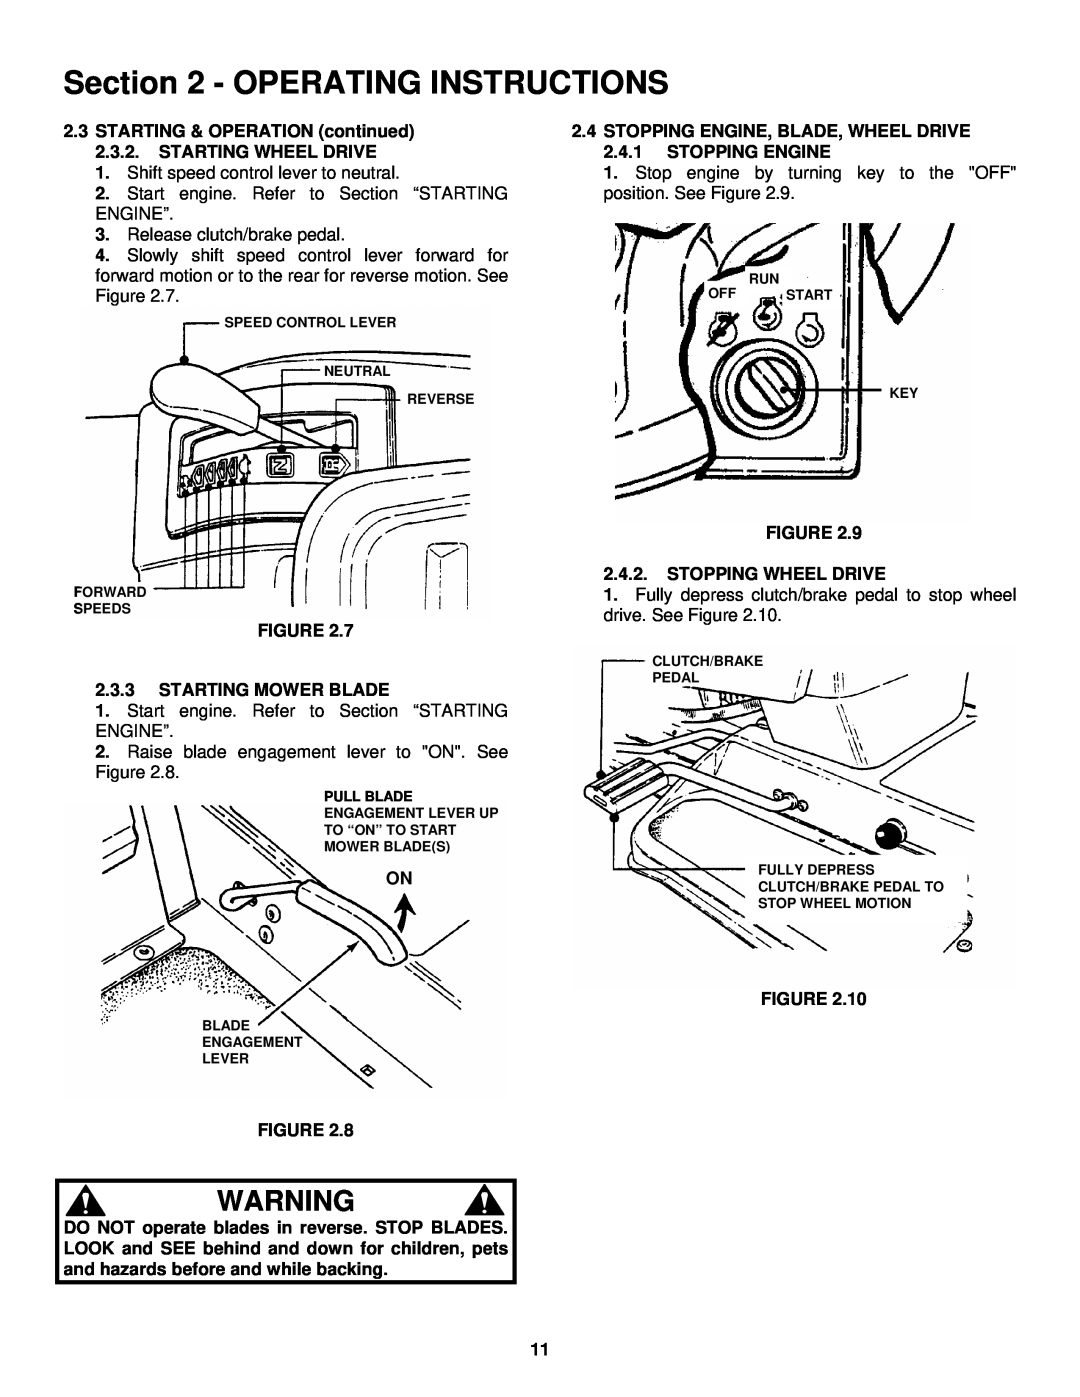 Snapper ELT180H33IBV important safety instructions Operating Instructions, 3.3STARTING MOWER BLADE 